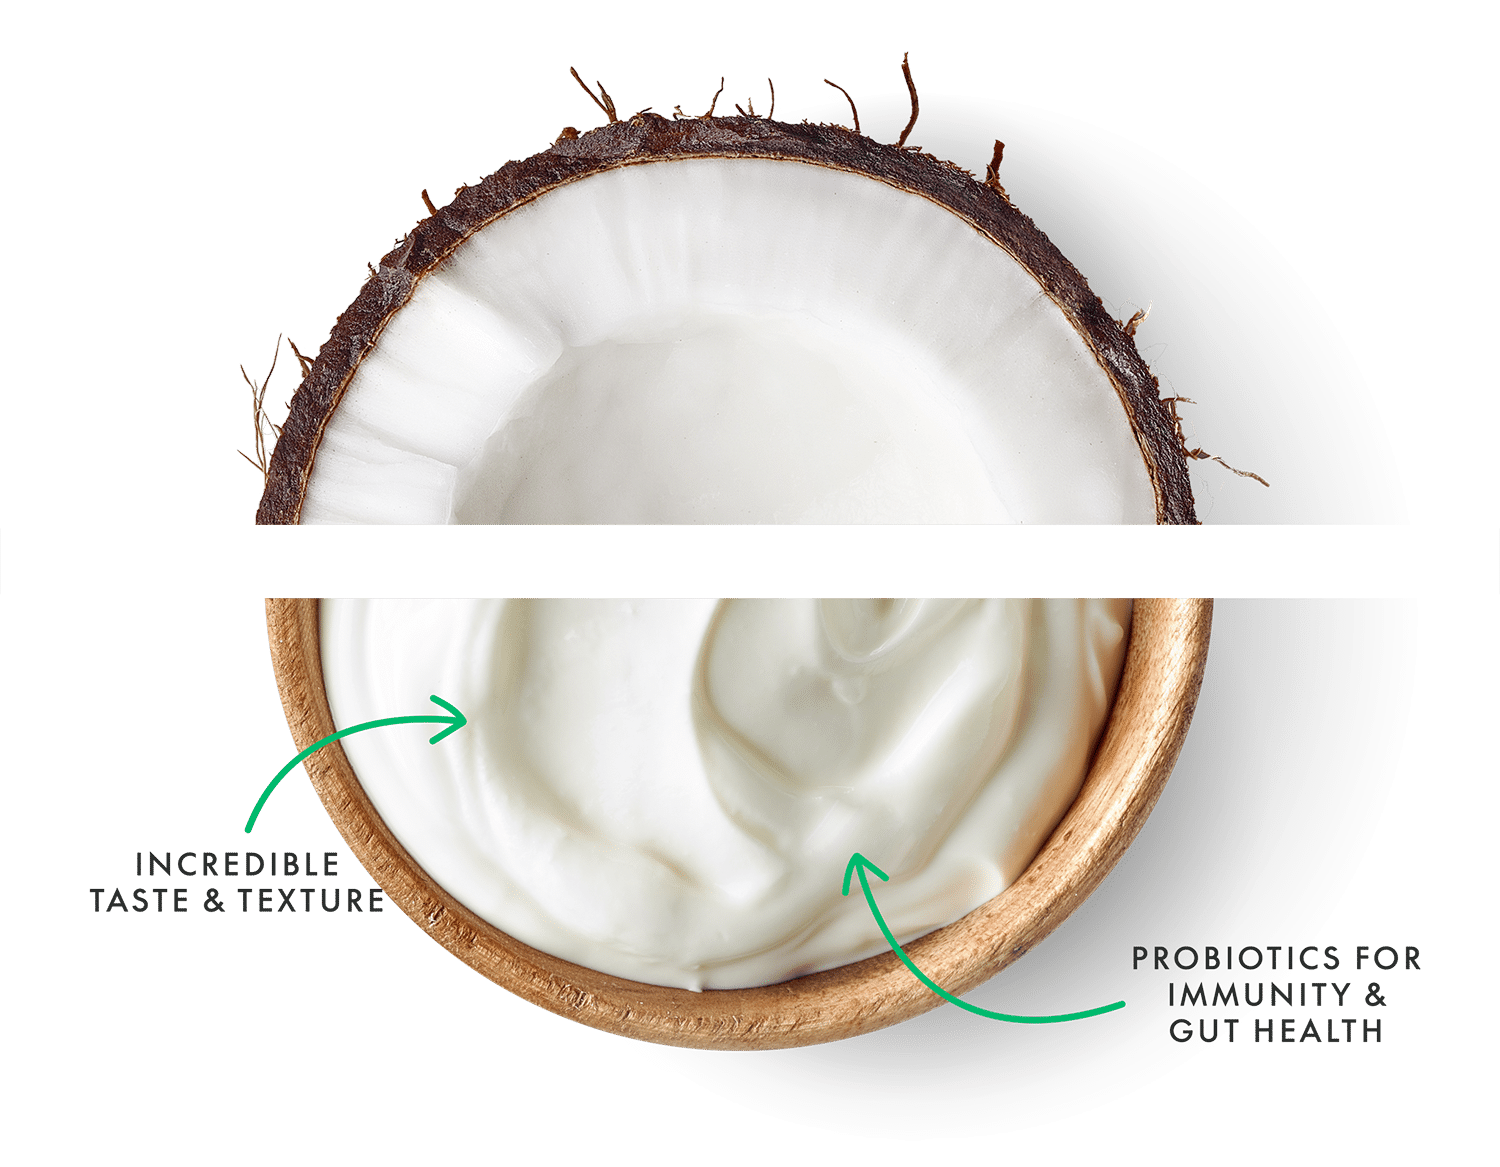 Coconut with text "incredible taste and texture," and "probiotics for immunity and gut health"